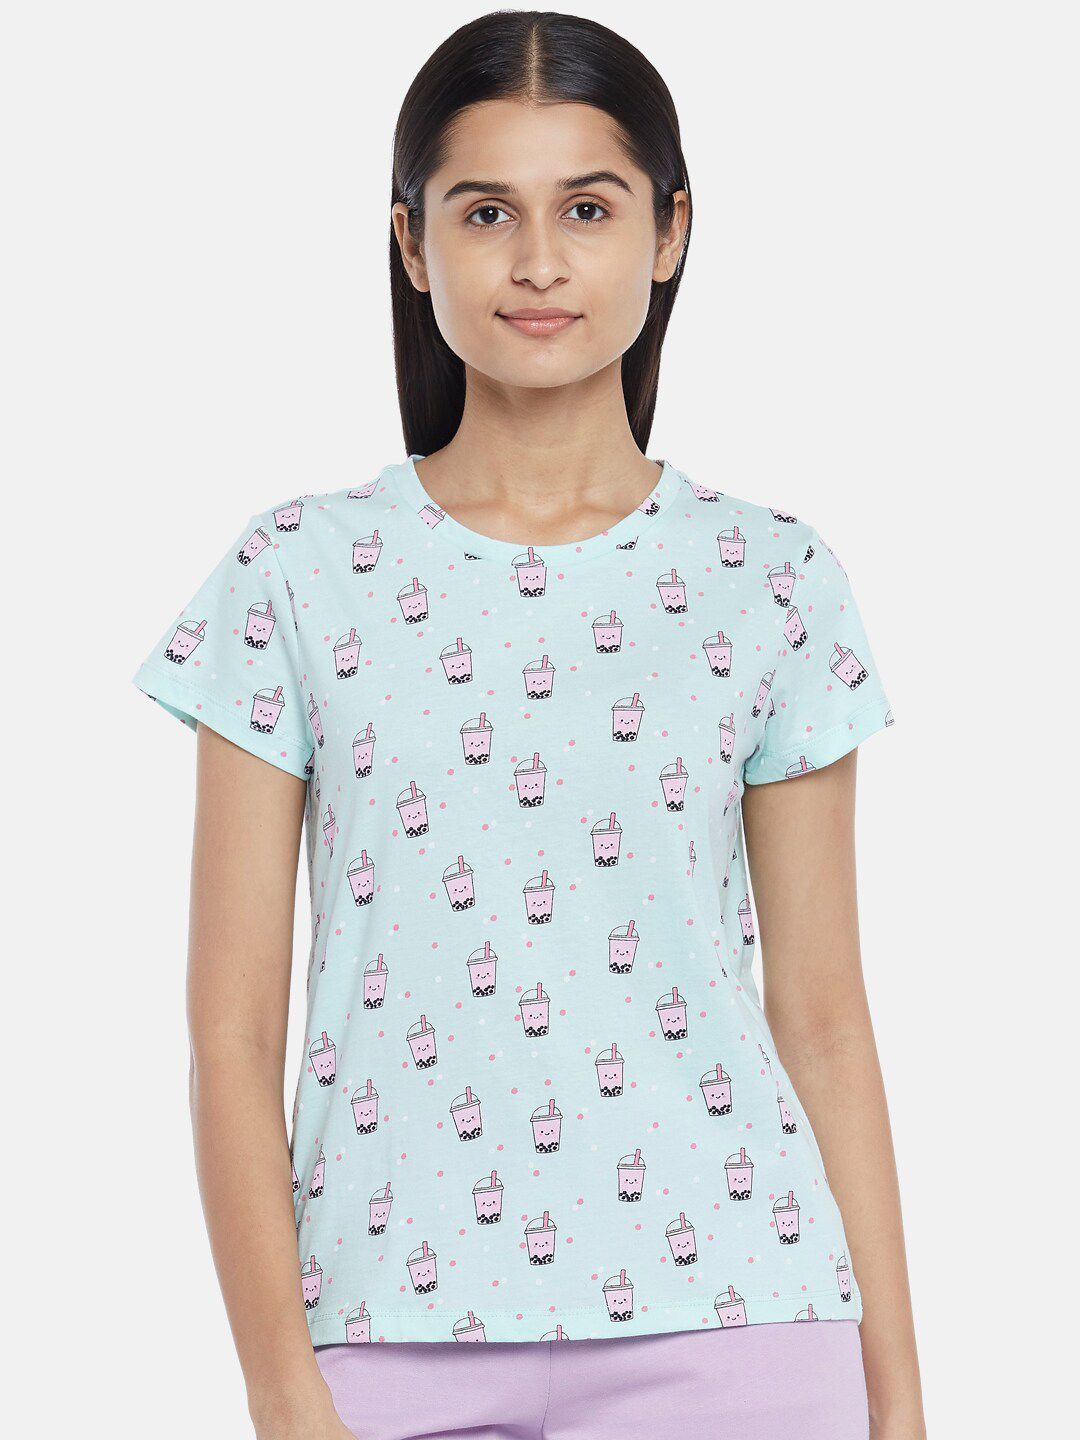 Dreamz by Pantaloons Women Blue Printed Lounge T-shirts Price in India